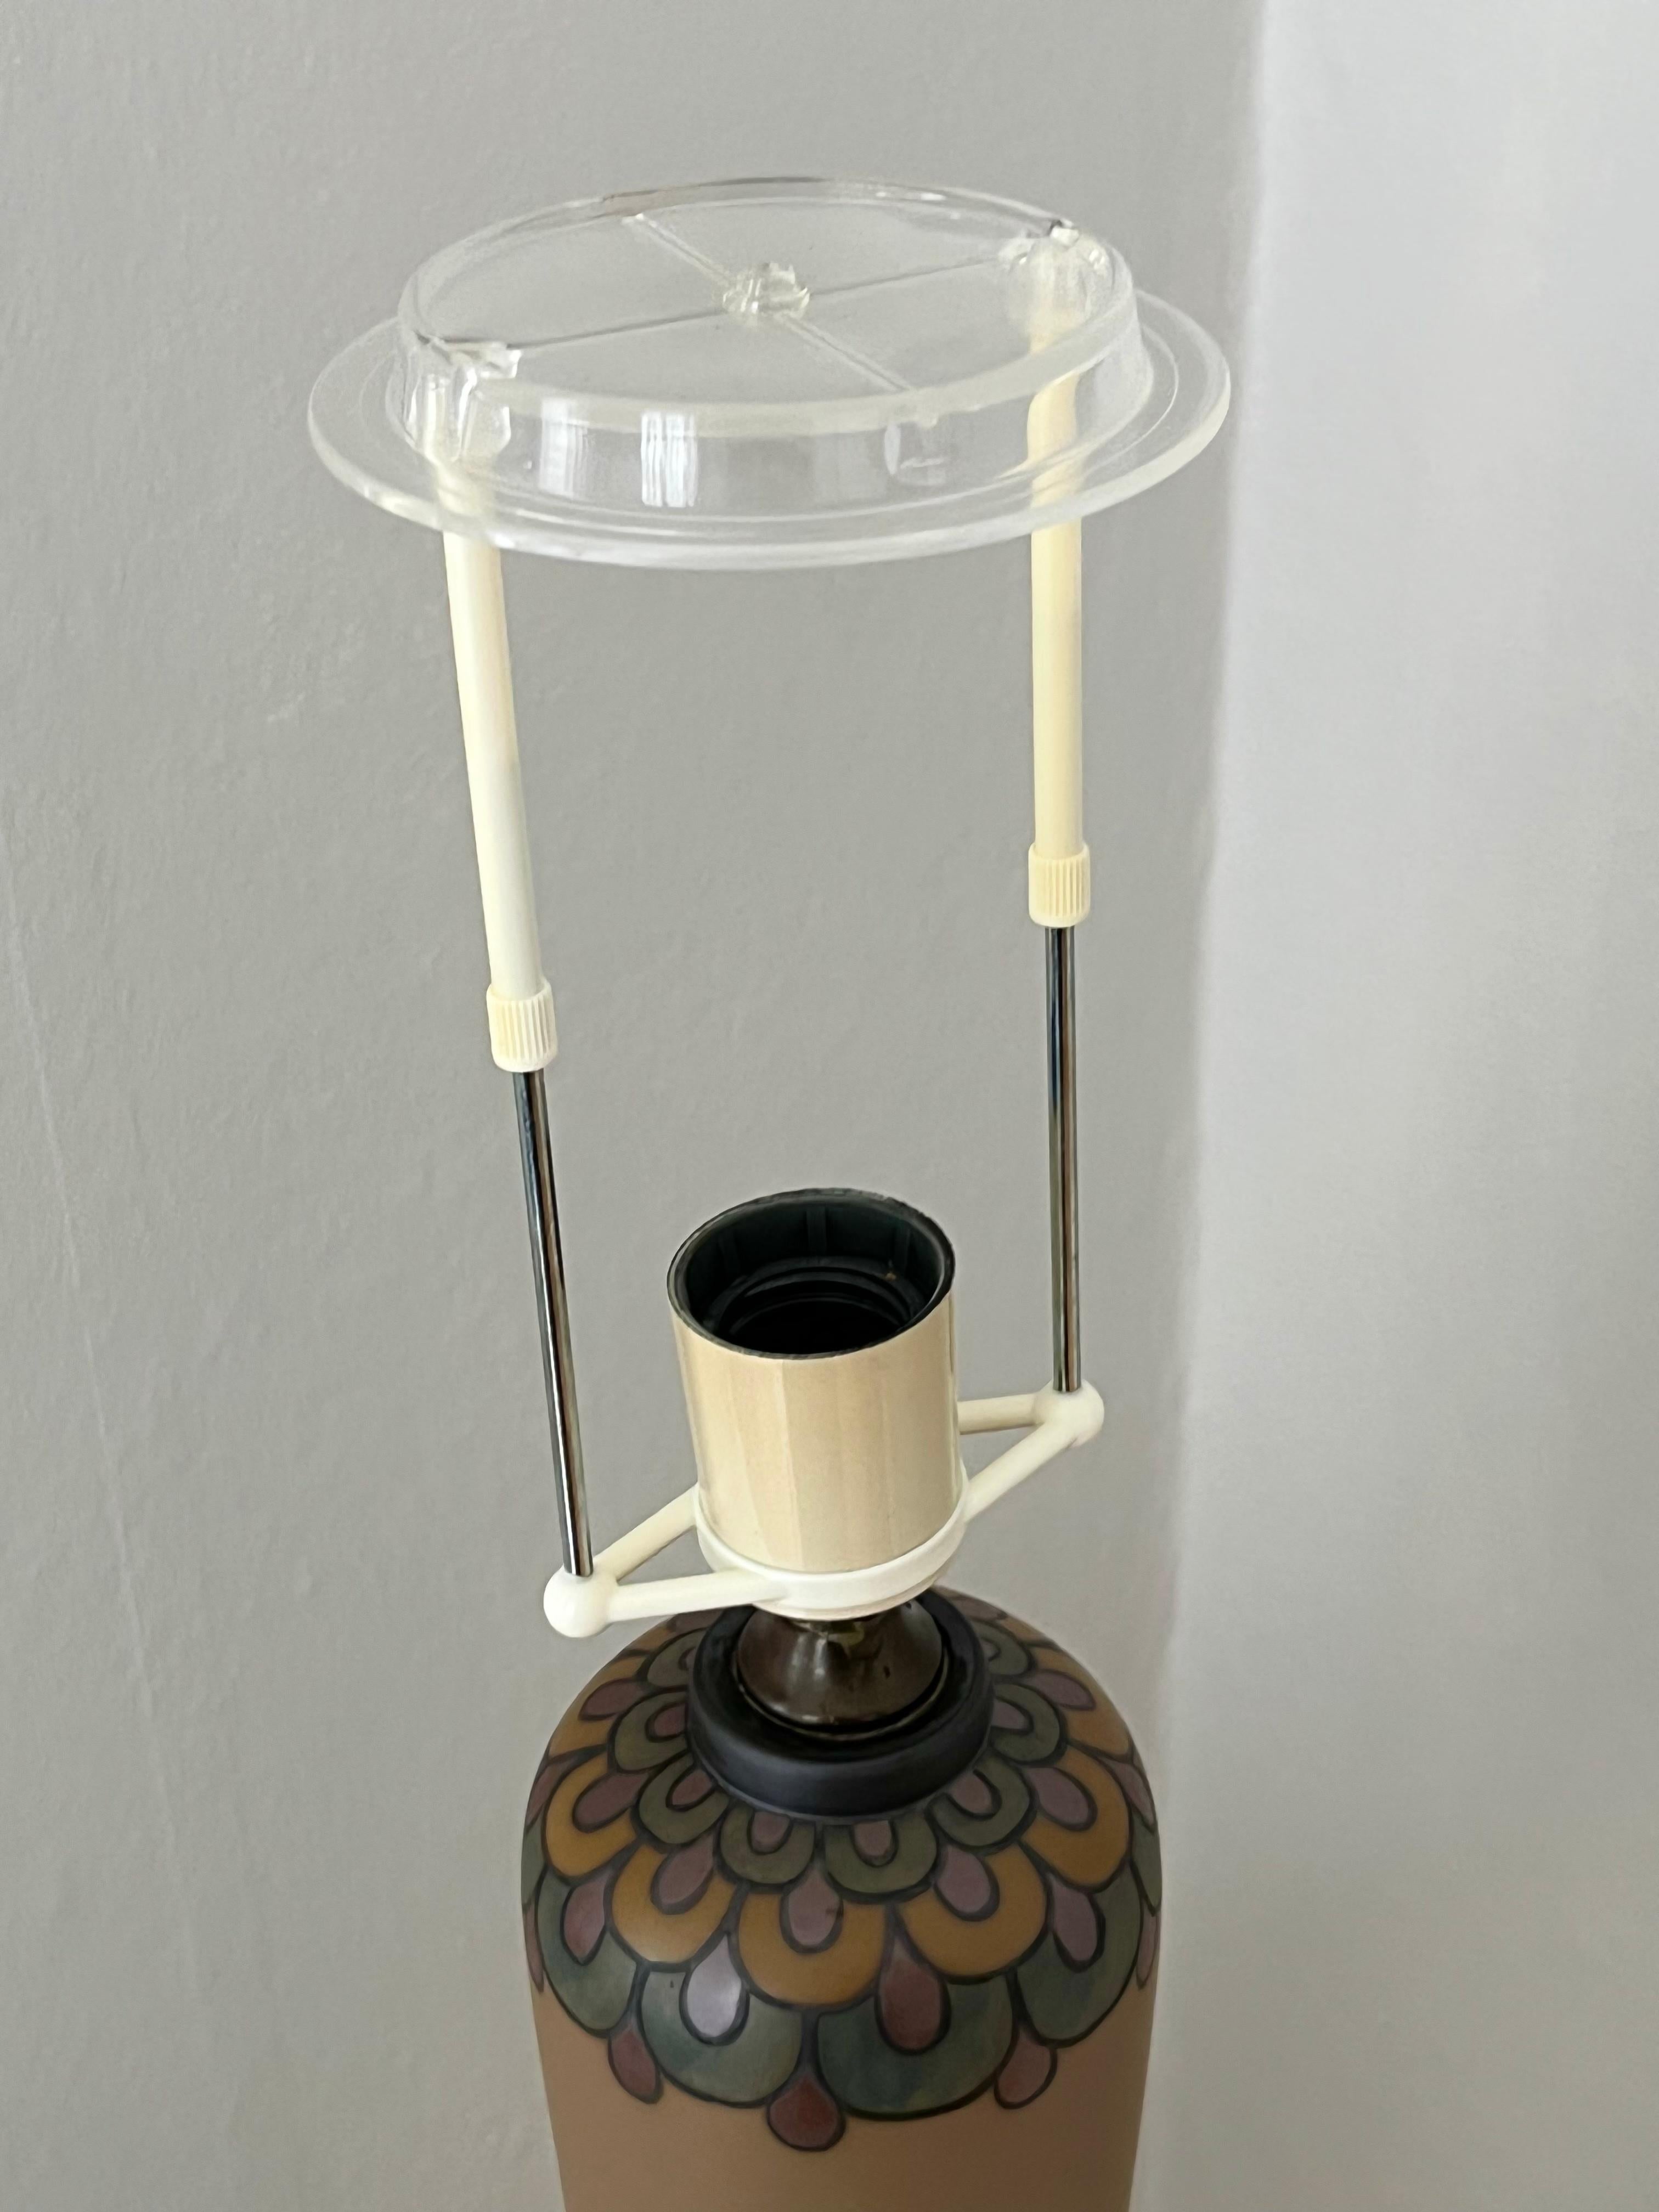 1930s Danish art nouveau ceramic hand decorated table lamp by L. Hjort For Sale 10